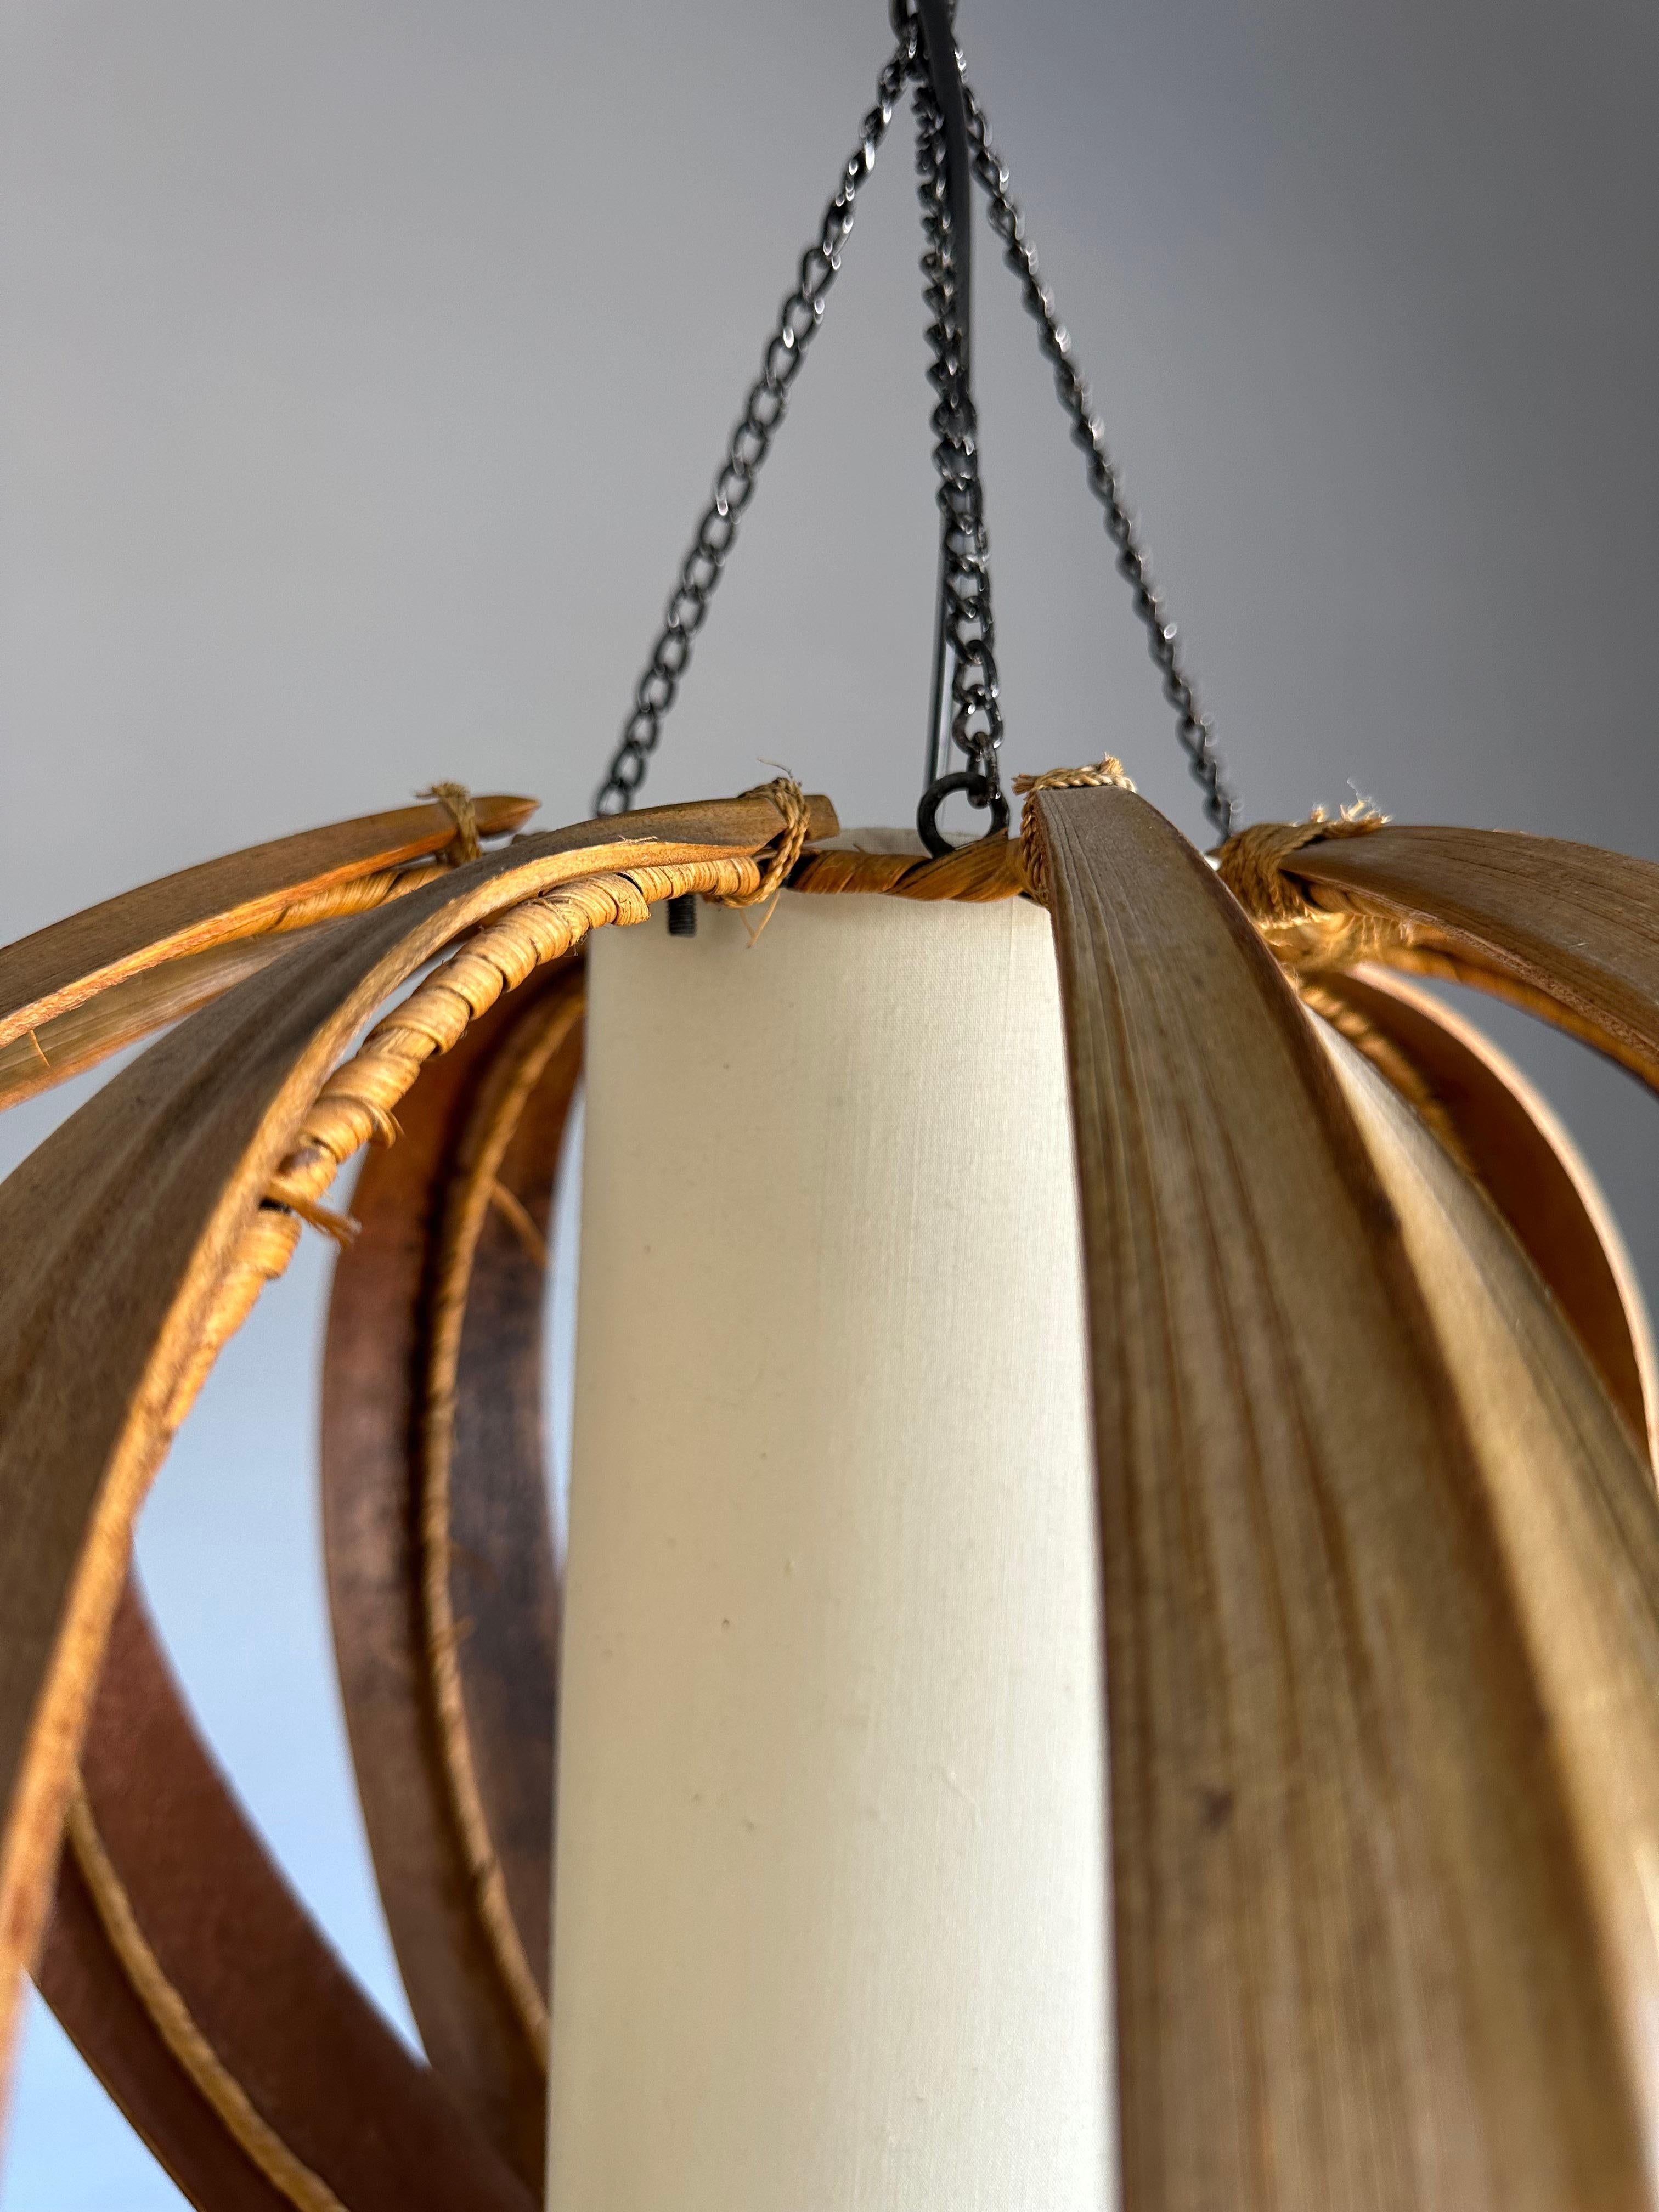 Handcrafted Mid-Century Modern Coconut Leaf, Wicker and Shade Pendant Light For Sale 5